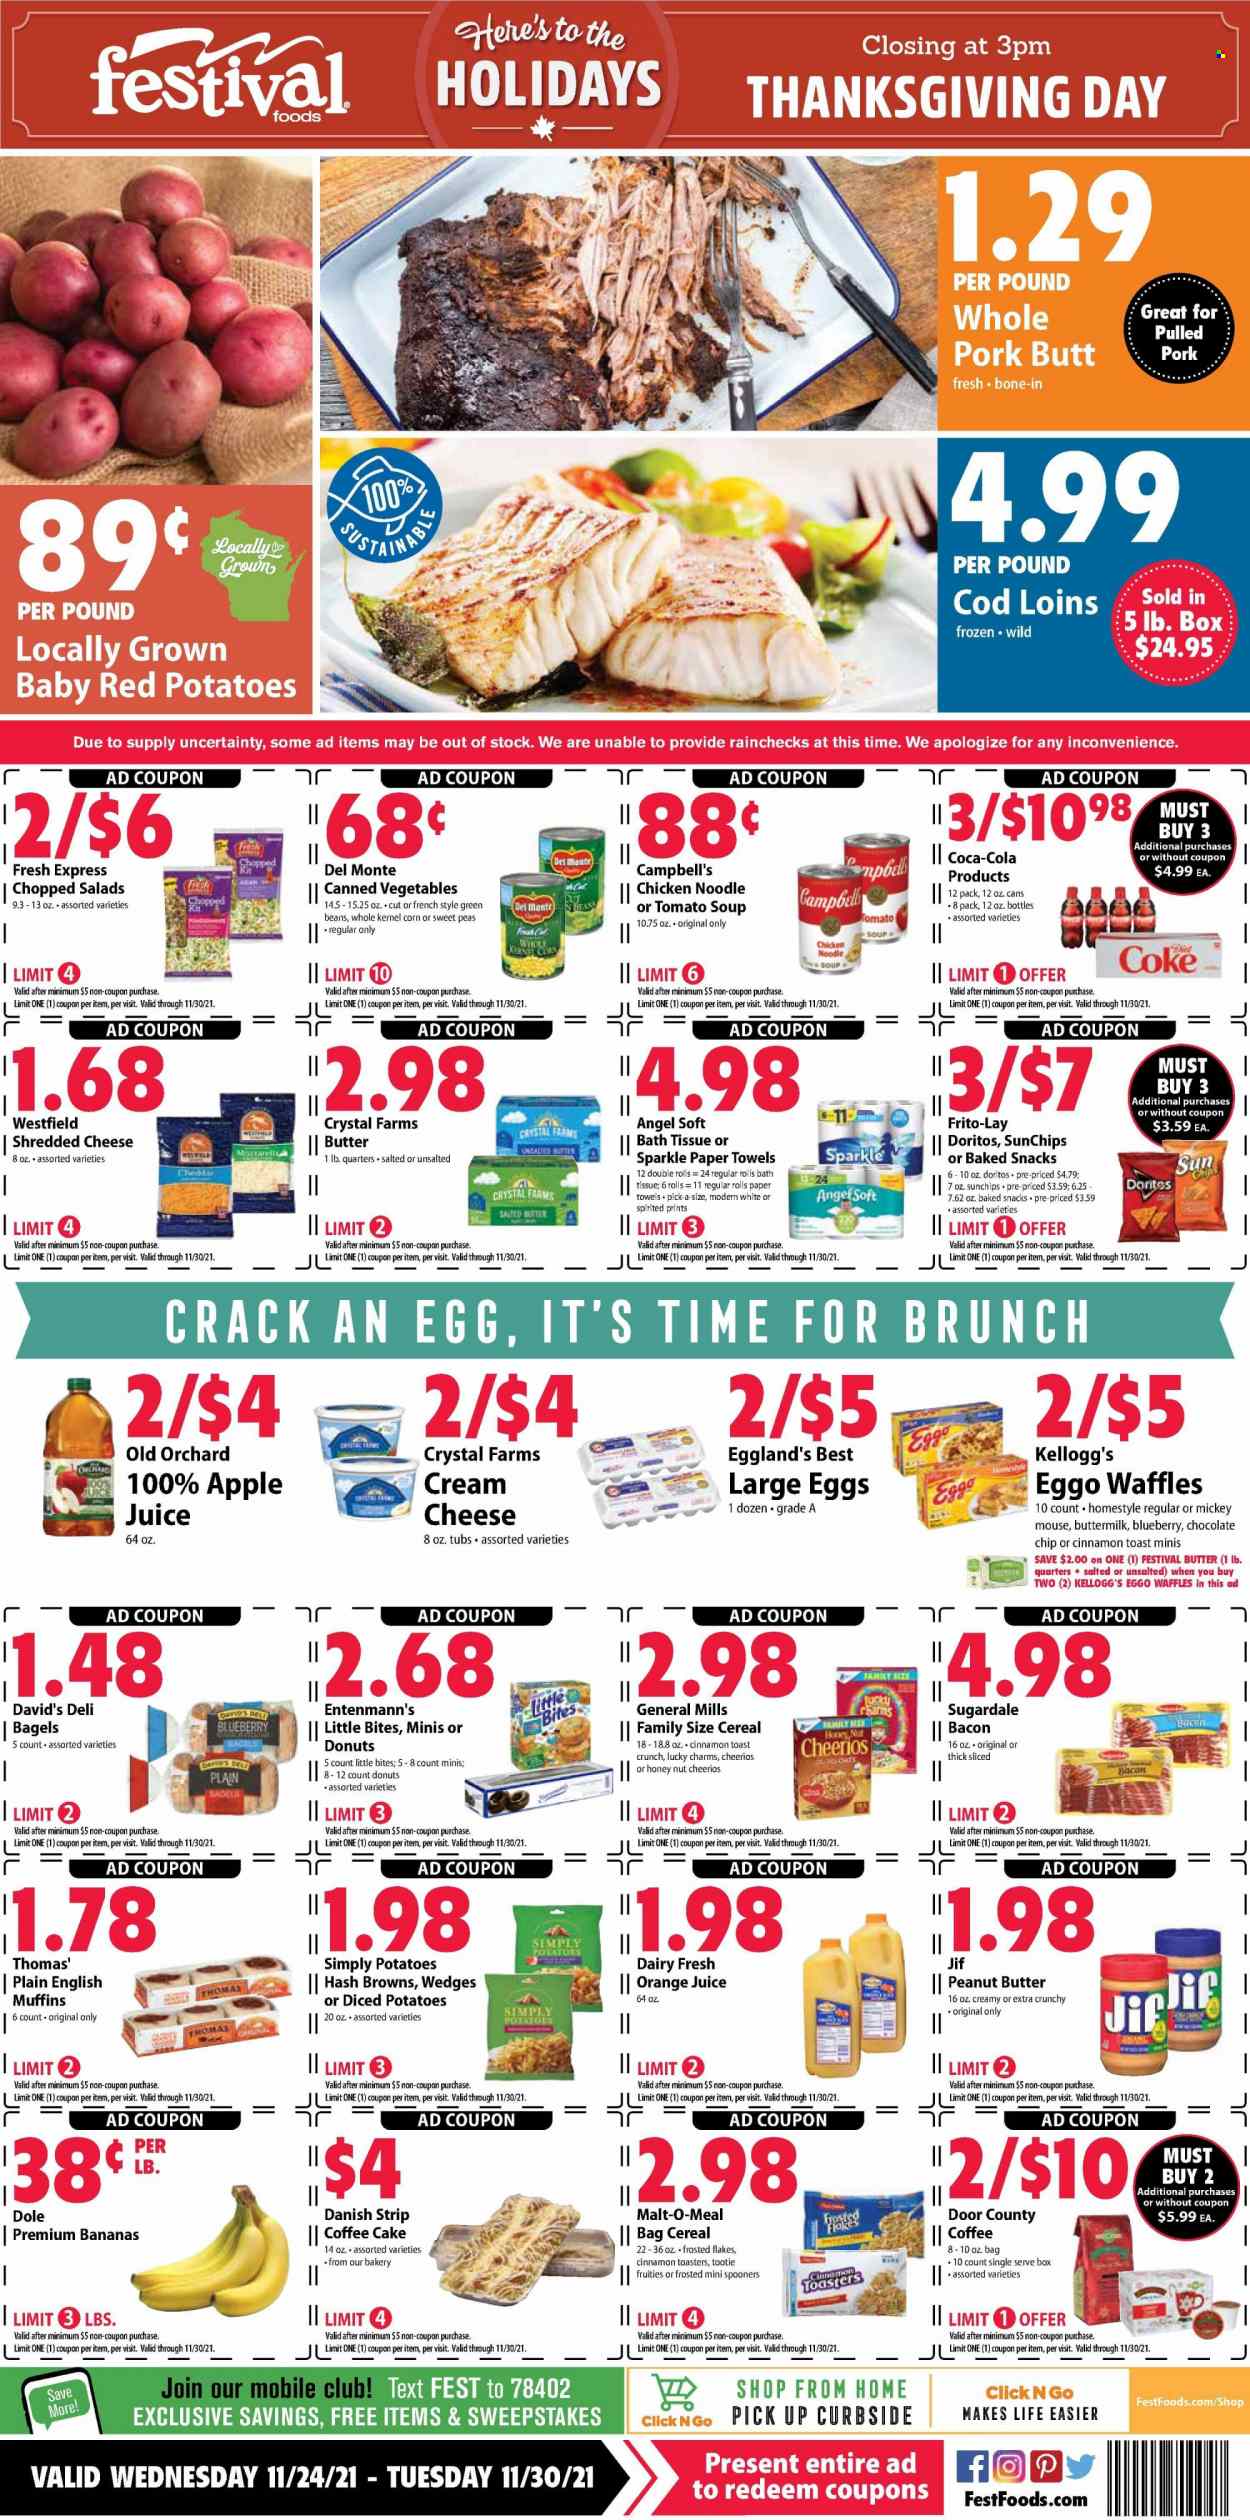 thumbnail - Festival Foods Flyer - 11/24/2021 - 11/30/2021 - Sales products - bagels, english muffins, cake, donut, waffles, coffee cake, Entenmann's, corn, green beans, potatoes, peas, Dole, red potatoes, chopped salad, bananas, cod, Campbell's, tomato soup, soup, noodles, pulled pork, Sugardale, bacon, shredded cheese, buttermilk, large eggs, Mickey Mouse, hash browns, snack, Kellogg's, Little Bites, Doritos, Frito-Lay, malt, canned vegetables, cereals, Cheerios, Frosted Flakes, cinnamon, peanut butter, Jif, apple juice, Coca-Cola, orange juice, juice, pork meat, bath tissue, kitchen towels, paper towels. Page 1.